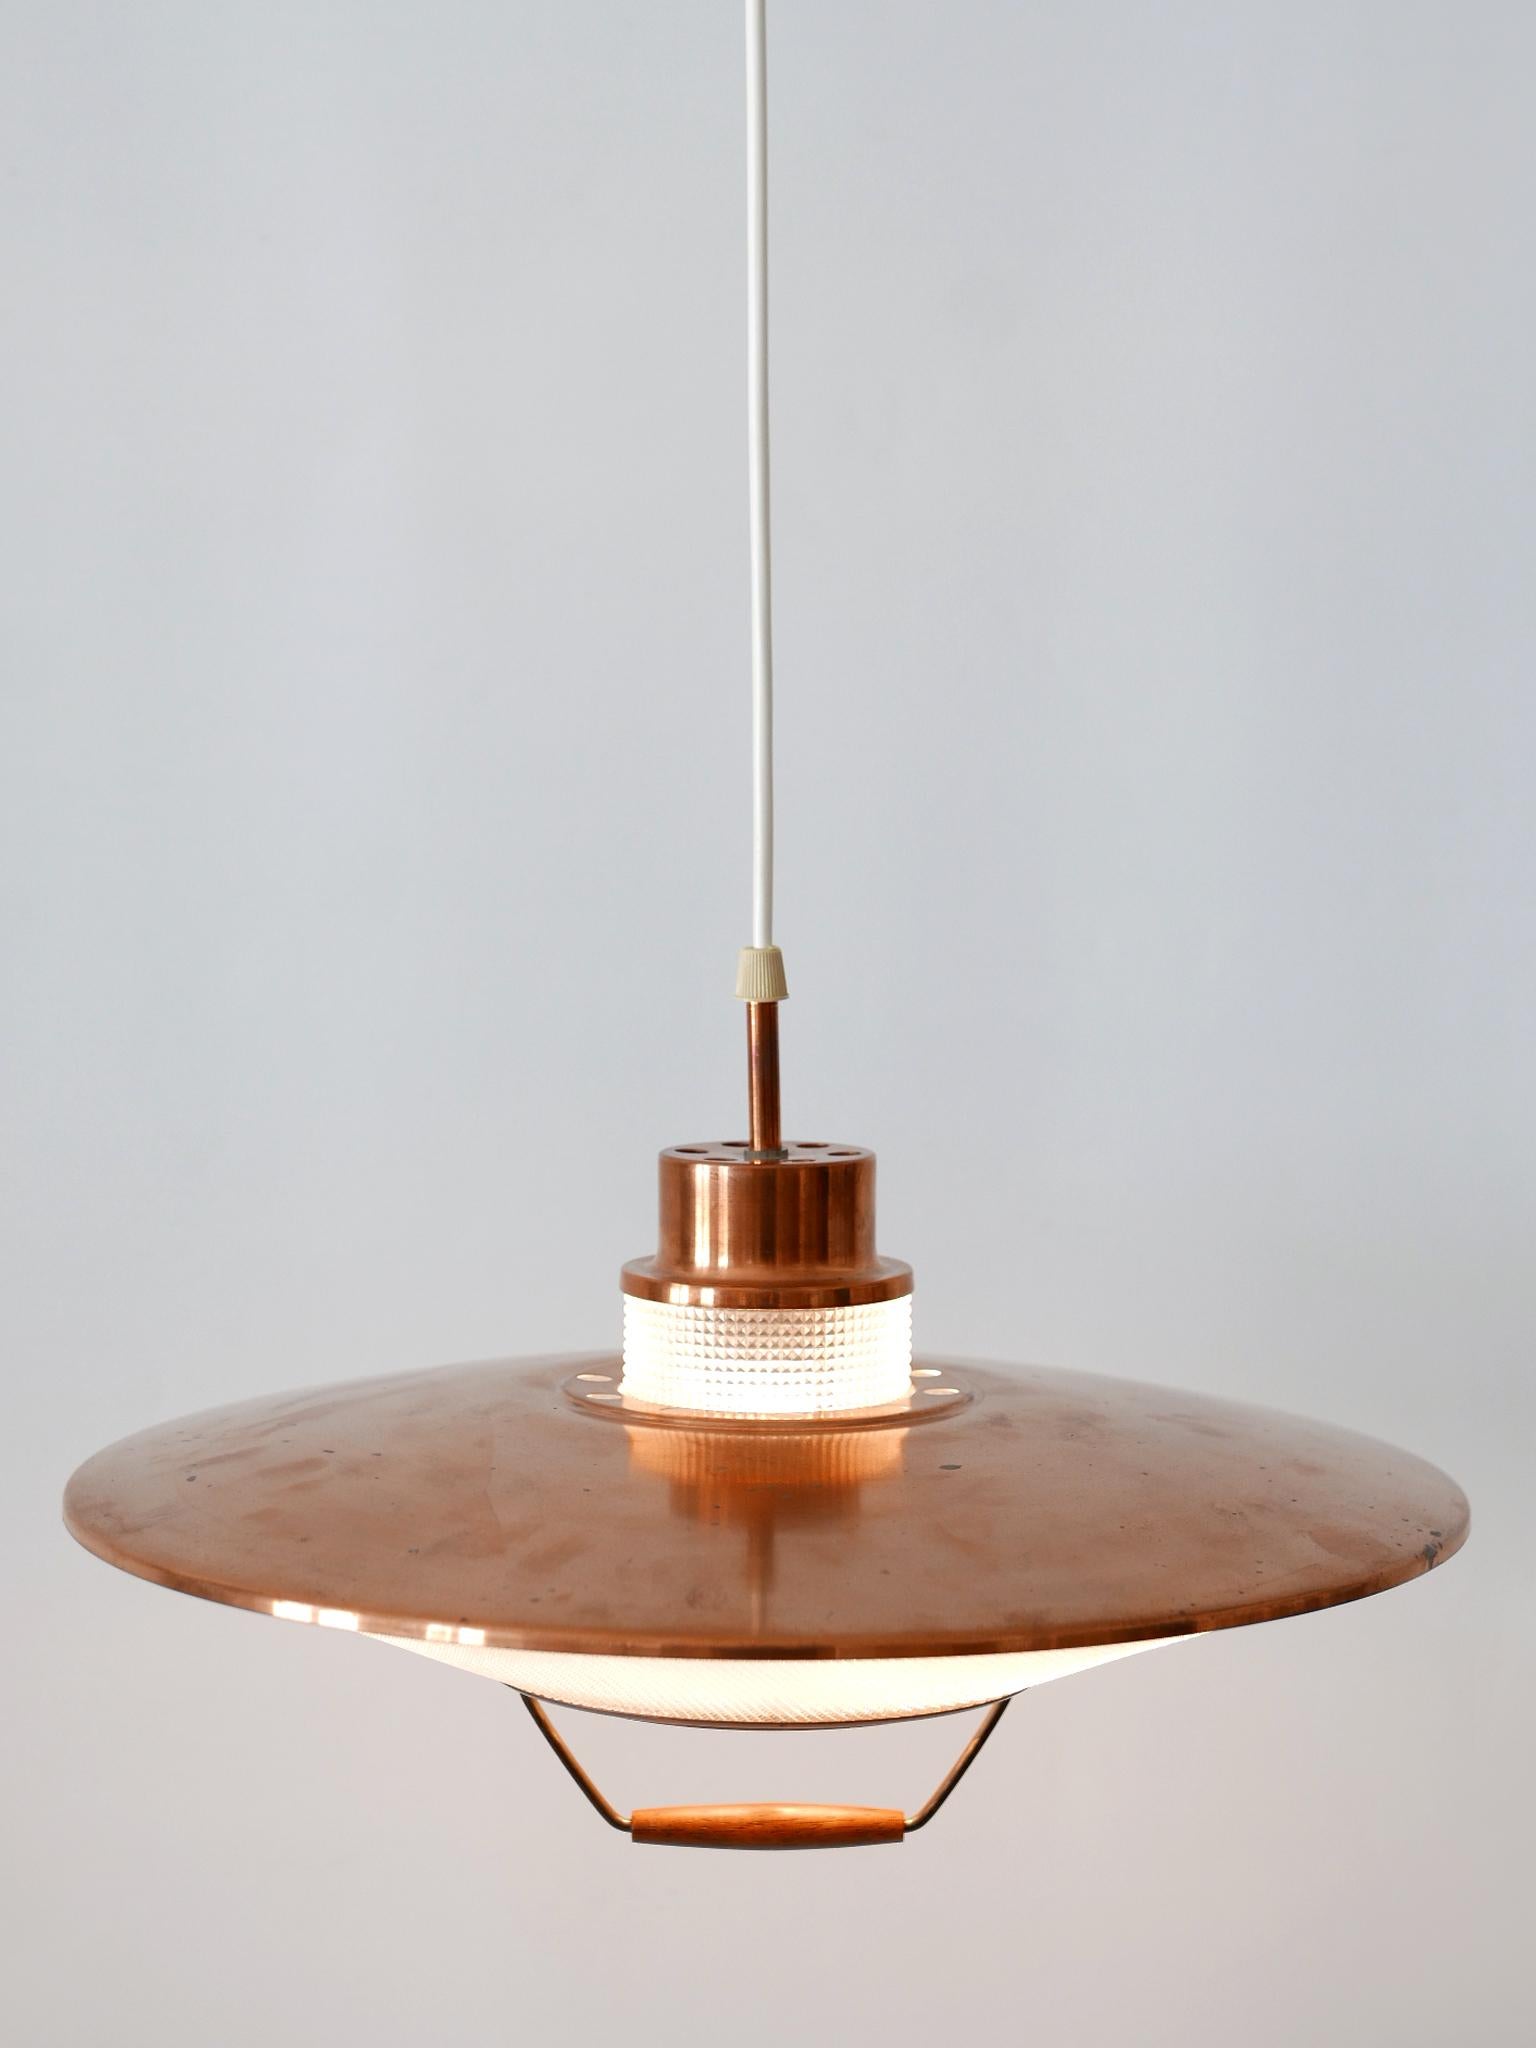 Rare and highly decorative Mid-Century Modern pendant lamp or hanging light. Designed & manufactured in 1960s in Scandinavia.

Executed in copper and acrylic, the lamp needs 1 x E27 / E26 Edison screw fit bulb, is rewired, in working condition and